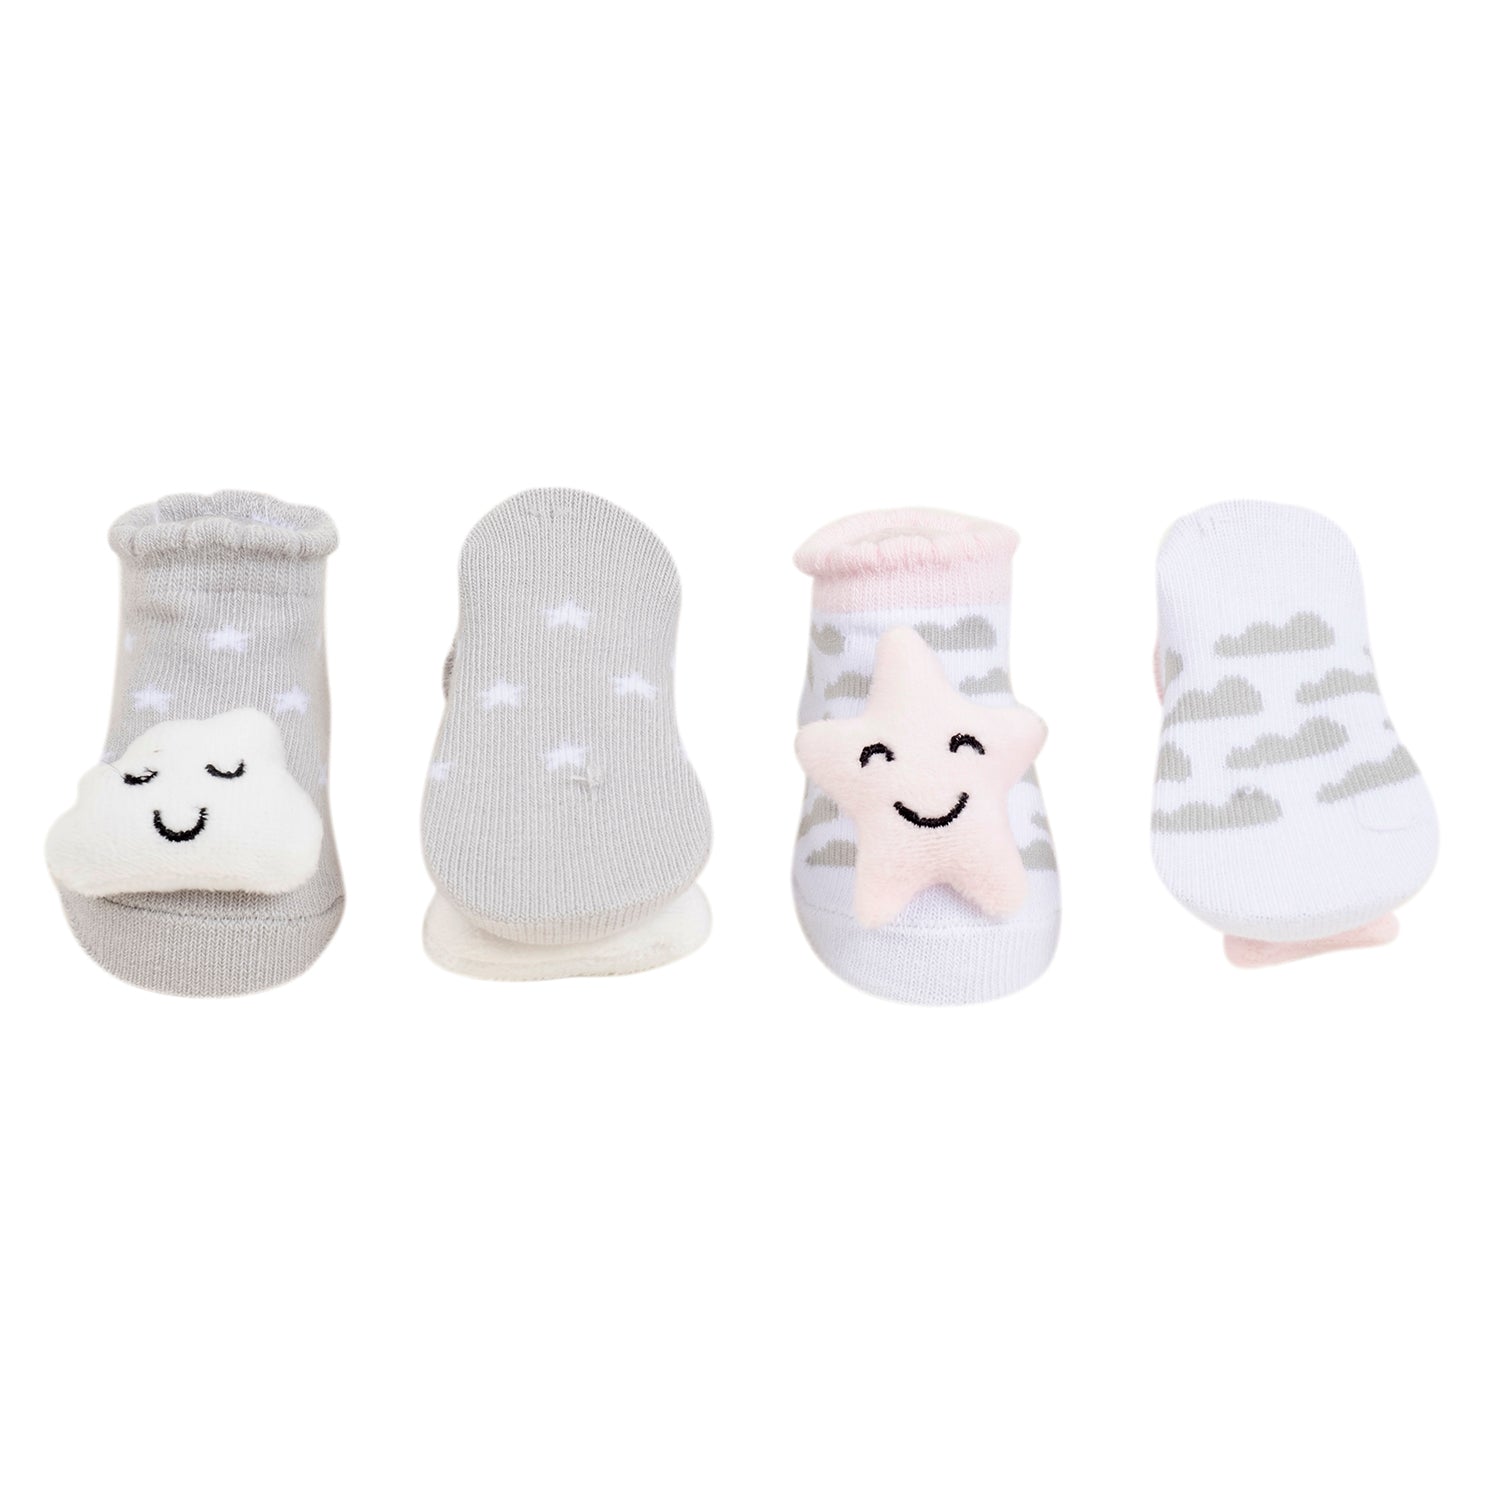 Baby Moo 3D Sleepy Star Cotton Ankle Length Fancy Infant Gift Set of 2 Socks Booties - Grey, Pink